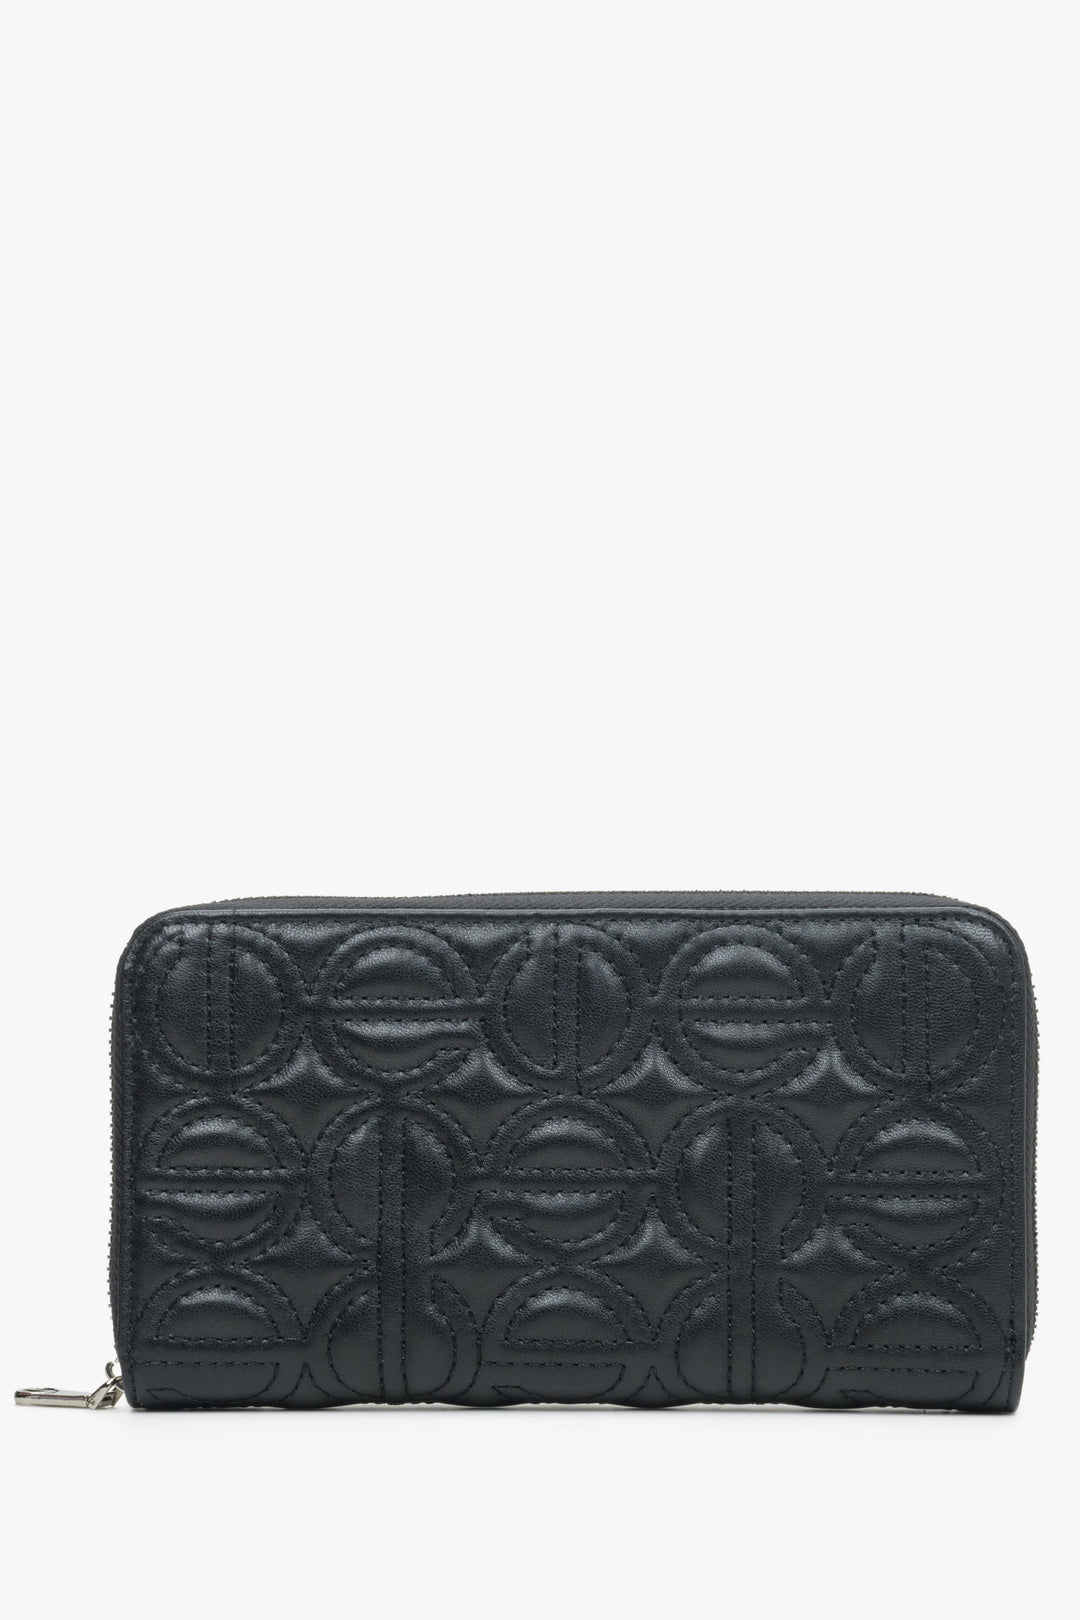 Black leather women's continental wallet with embossed Estro brand logo.